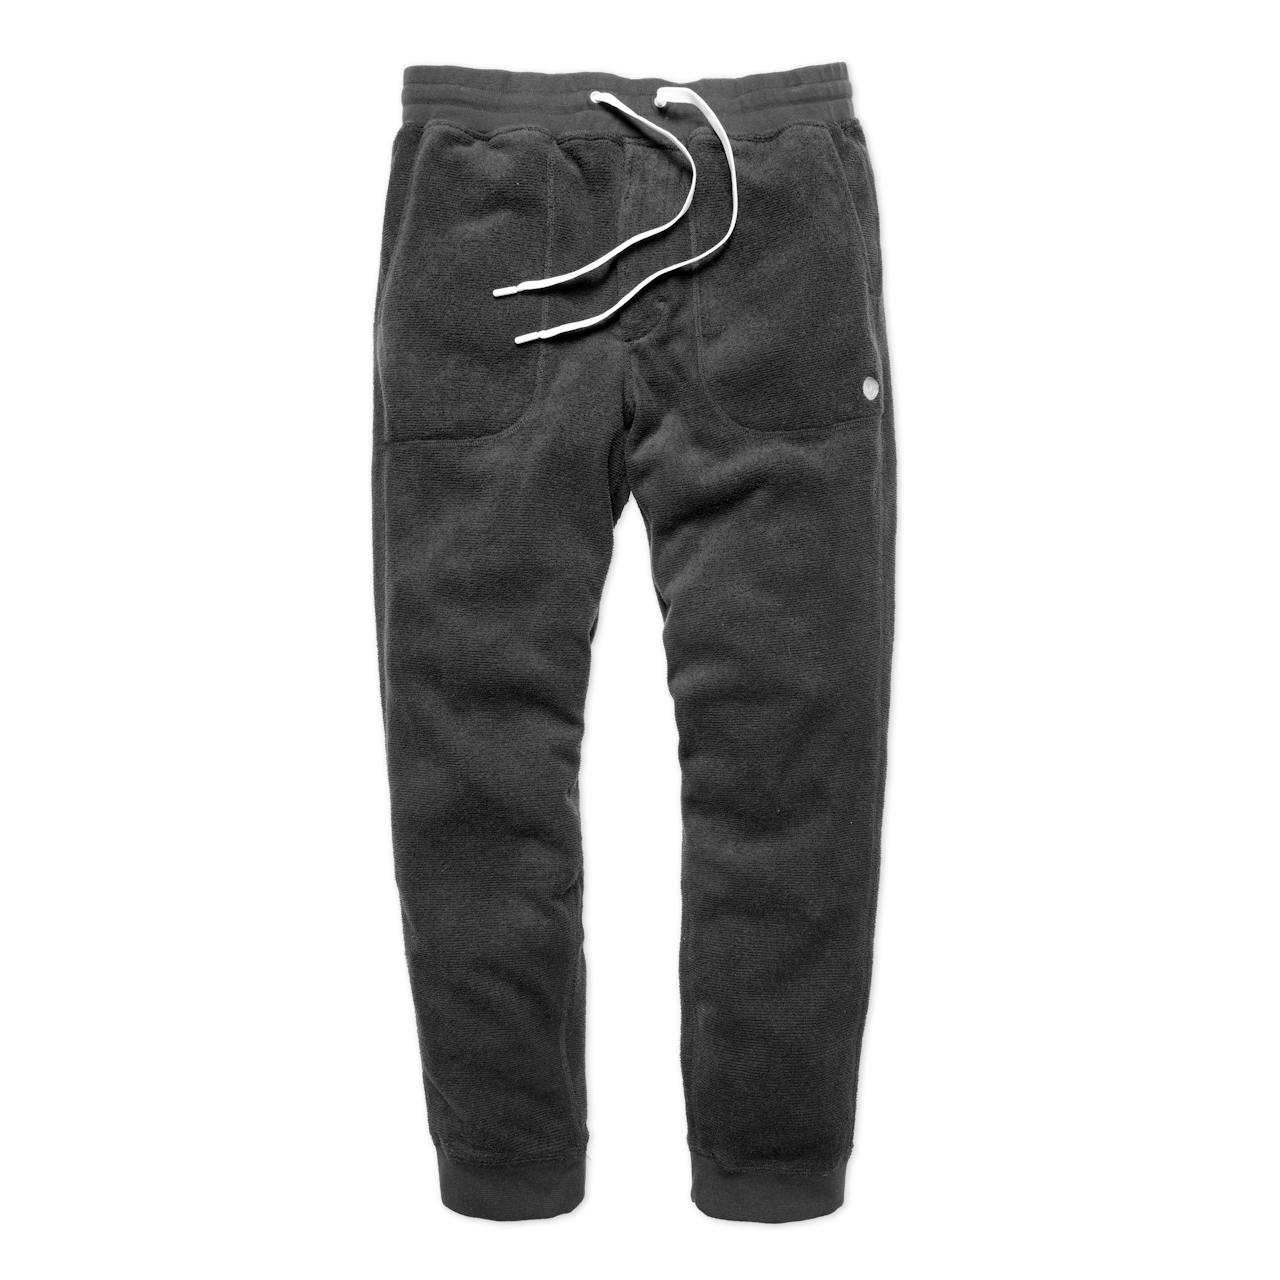 Outerknown Hightide Sweatpant